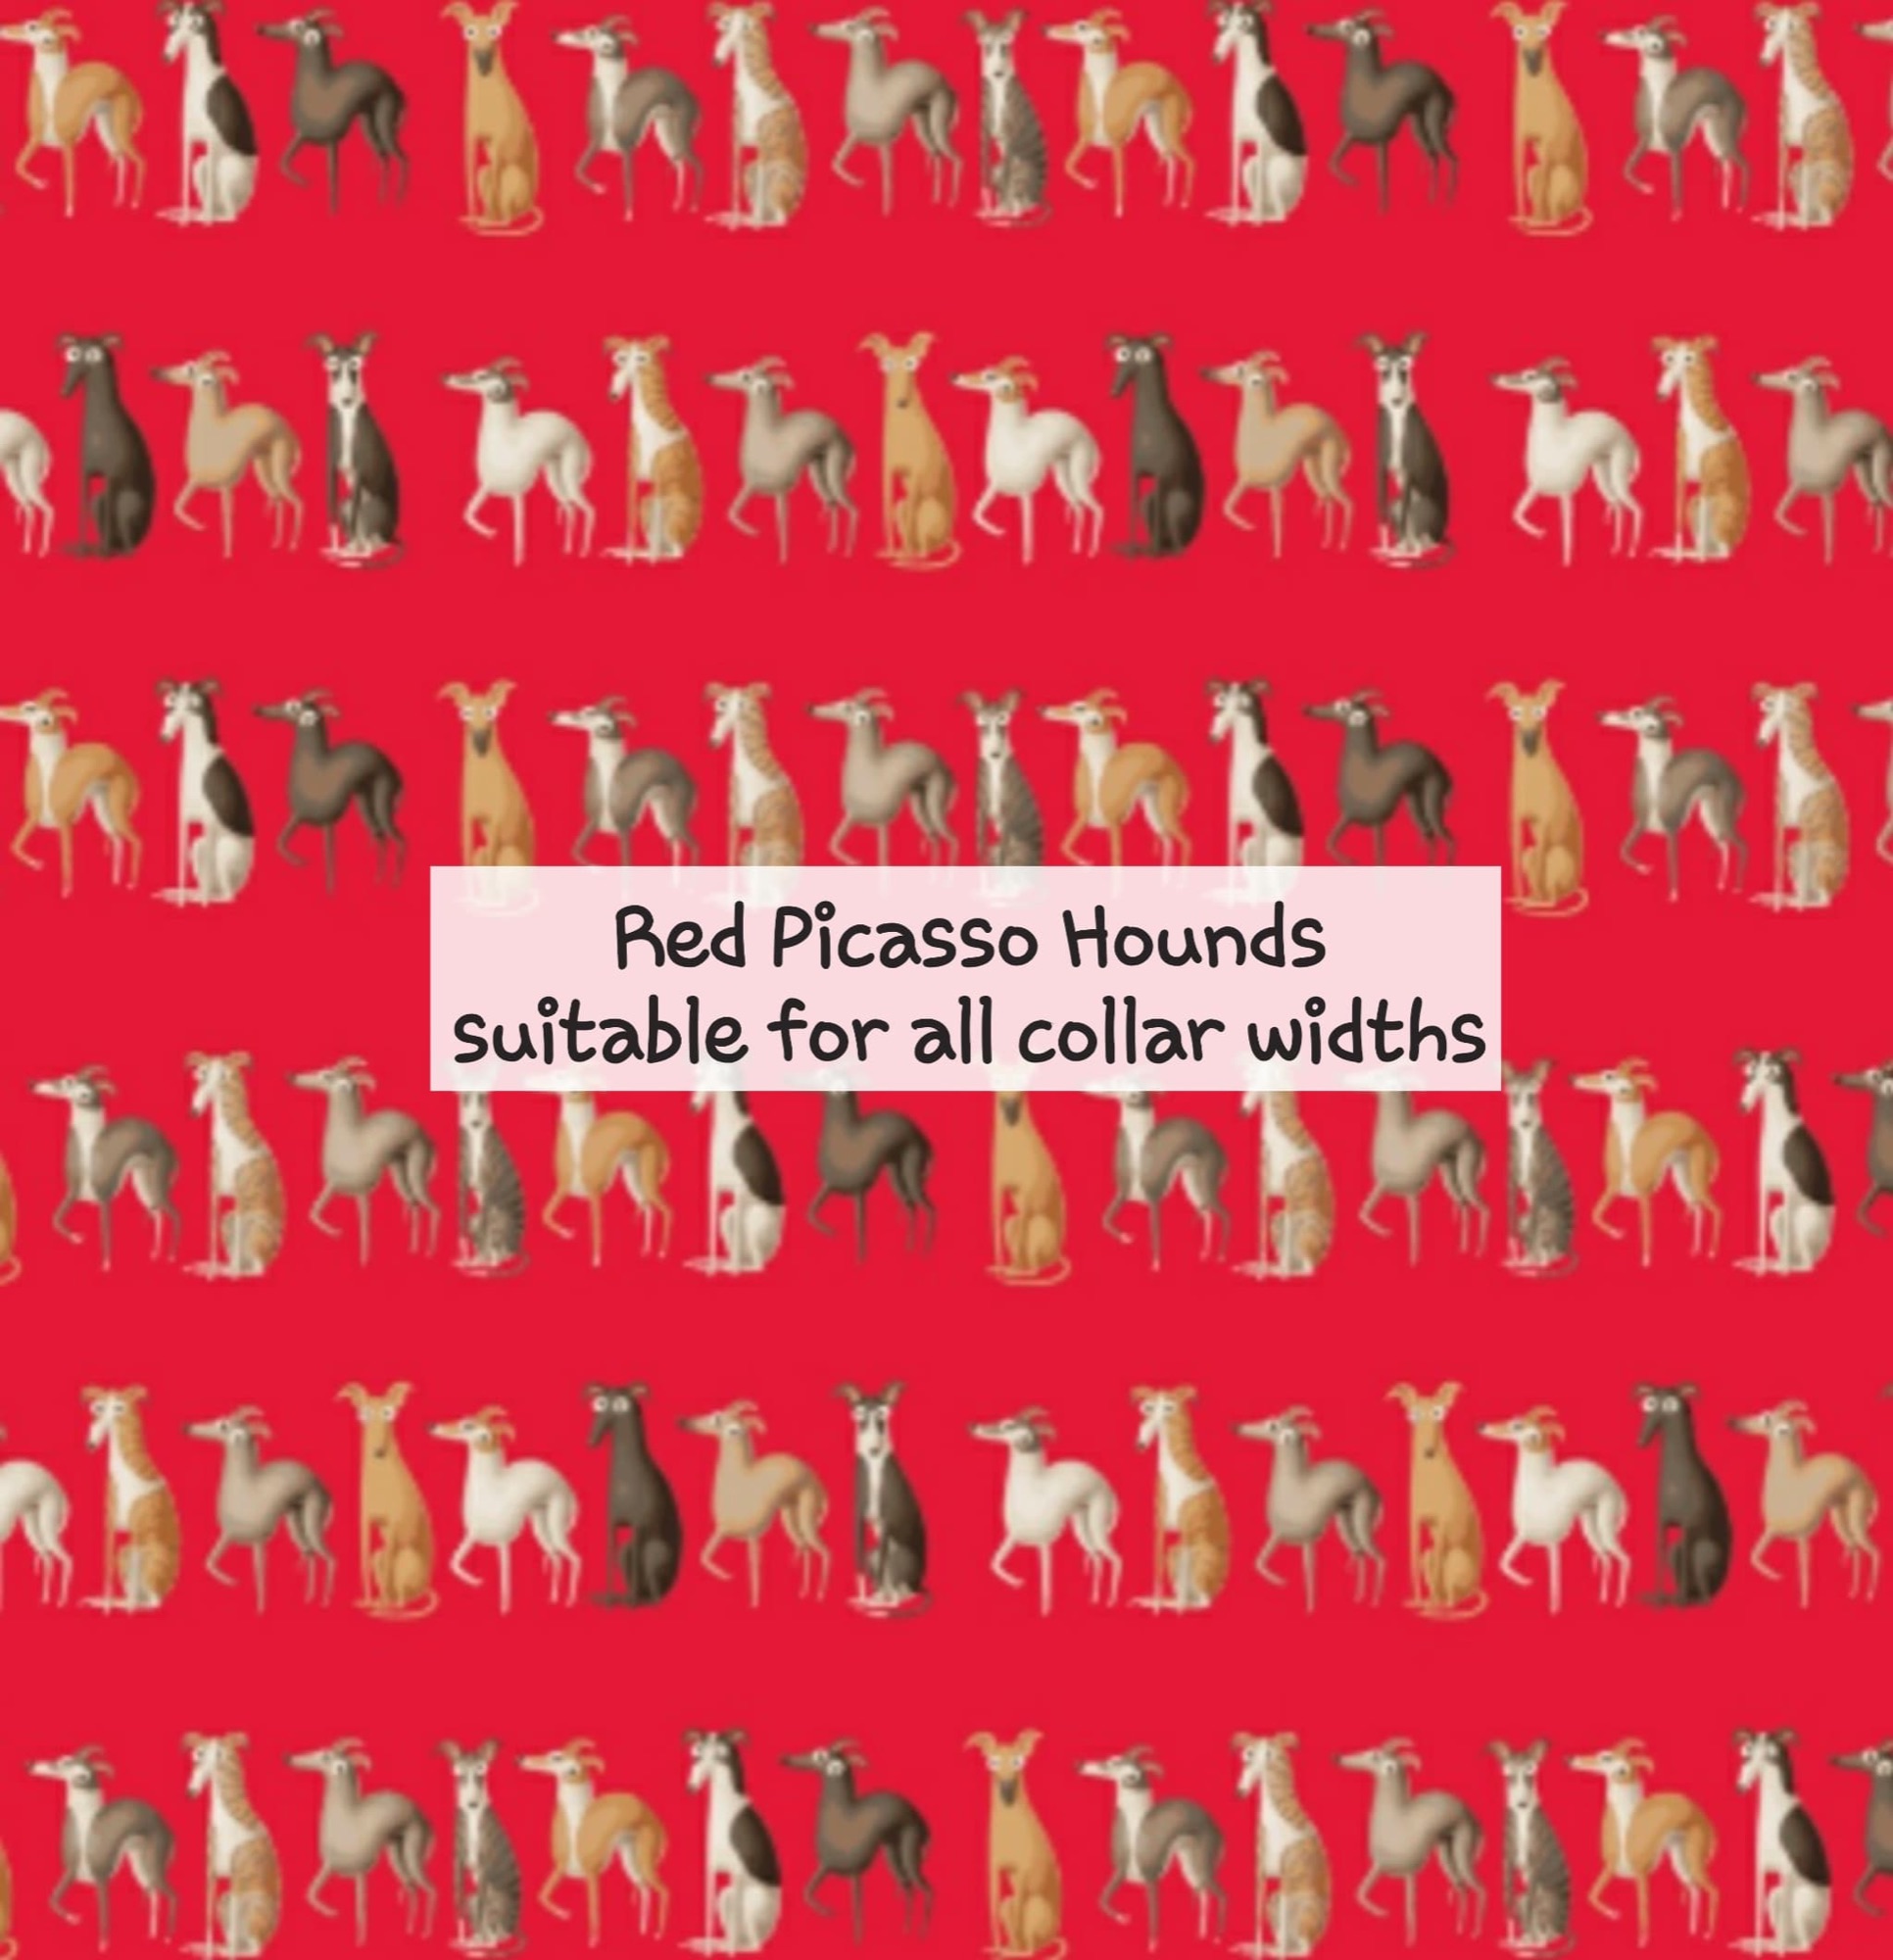 Red Picasso Hounds - Suitable for all collar widths